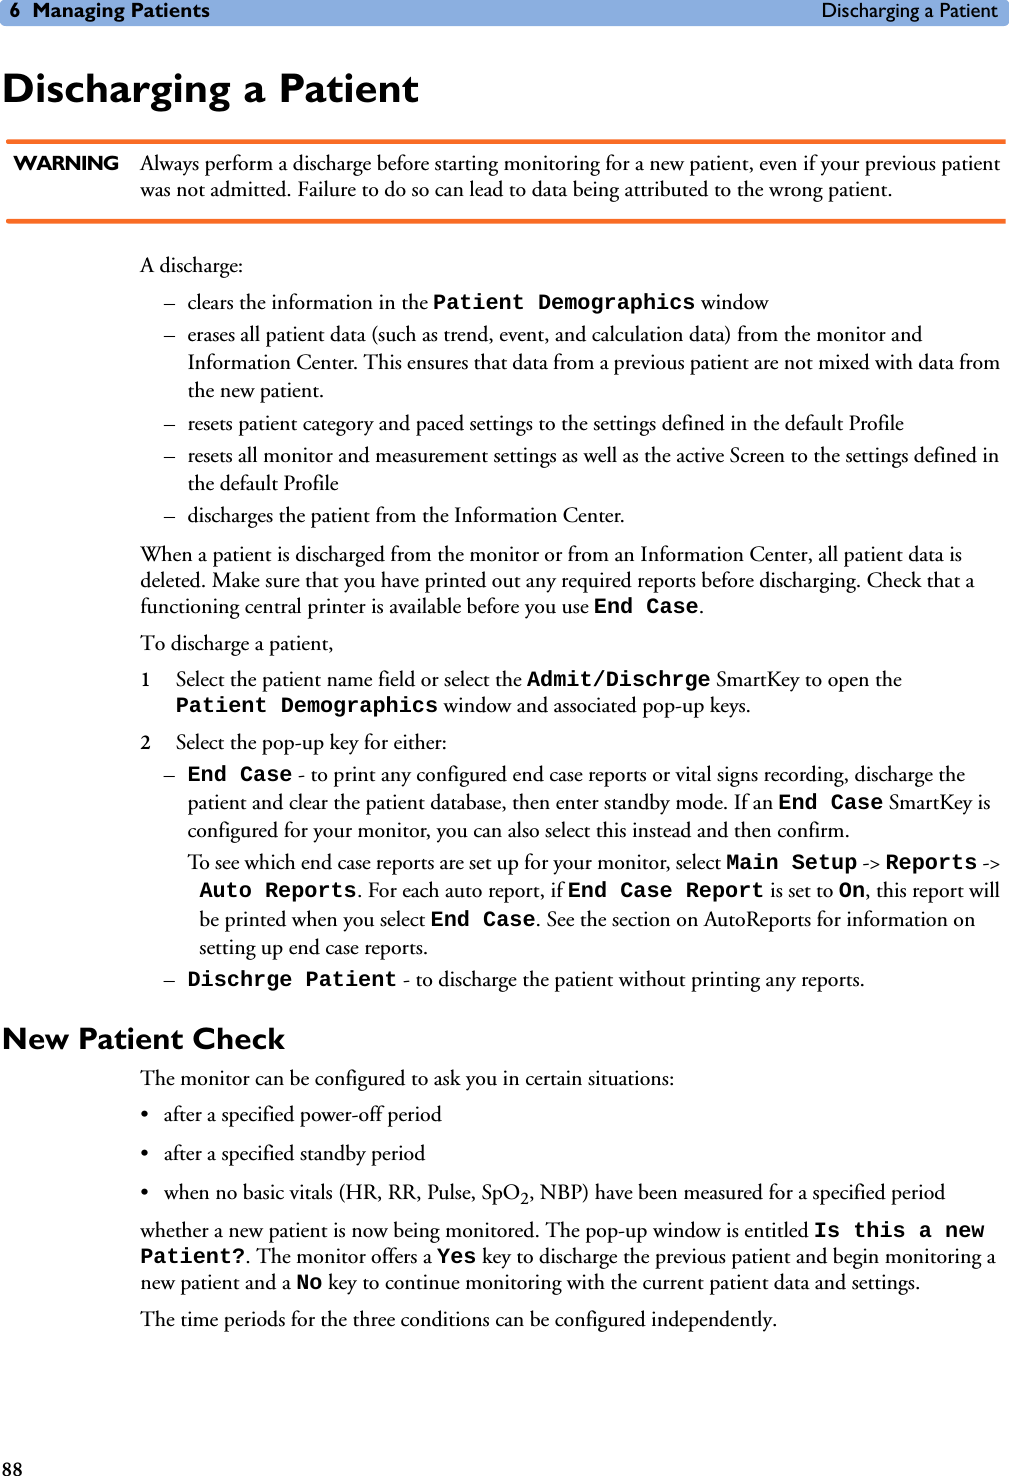 6 Managing Patients Discharging a Patient88Discharging a PatientWARNING Always perform a discharge before starting monitoring for a new patient, even if your previous patient was not admitted. Failure to do so can lead to data being attributed to the wrong patient.A discharge:– clears the information in the Patient Demographics window – erases all patient data (such as trend, event, and calculation data) from the monitor and Information Center. This ensures that data from a previous patient are not mixed with data from the new patient. – resets patient category and paced settings to the settings defined in the default Profile– resets all monitor and measurement settings as well as the active Screen to the settings defined in the default Profile– discharges the patient from the Information Center. When a patient is discharged from the monitor or from an Information Center, all patient data is deleted. Make sure that you have printed out any required reports before discharging. Check that a functioning central printer is available before you use End Case.To discharge a patient, 1Select the patient name field or select the Admit/Dischrge SmartKey to open the Patient Demographics window and associated pop-up keys.2Select the pop-up key for either:–End Case - to print any configured end case reports or vital signs recording, discharge the patient and clear the patient database, then enter standby mode. If an End Case SmartKey is configured for your monitor, you can also select this instead and then confirm. To see which end case reports are set up for your monitor, select Main Setup -&gt; Reports -&gt; Auto Reports. For each auto report, if End Case Report is set to On, this report will be printed when you select End Case. See the section on AutoReports for information on setting up end case reports. –Dischrge Patient - to discharge the patient without printing any reports. New Patient CheckThe monitor can be configured to ask you in certain situations:• after a specified power-off period• after a specified standby period• when no basic vitals (HR, RR, Pulse, SpO2, NBP) have been measured for a specified periodwhether a new patient is now being monitored. The pop-up window is entitled Is this a new Patient?. The monitor offers a Yes key to discharge the previous patient and begin monitoring a new patient and a No key to continue monitoring with the current patient data and settings. The time periods for the three conditions can be configured independently. 